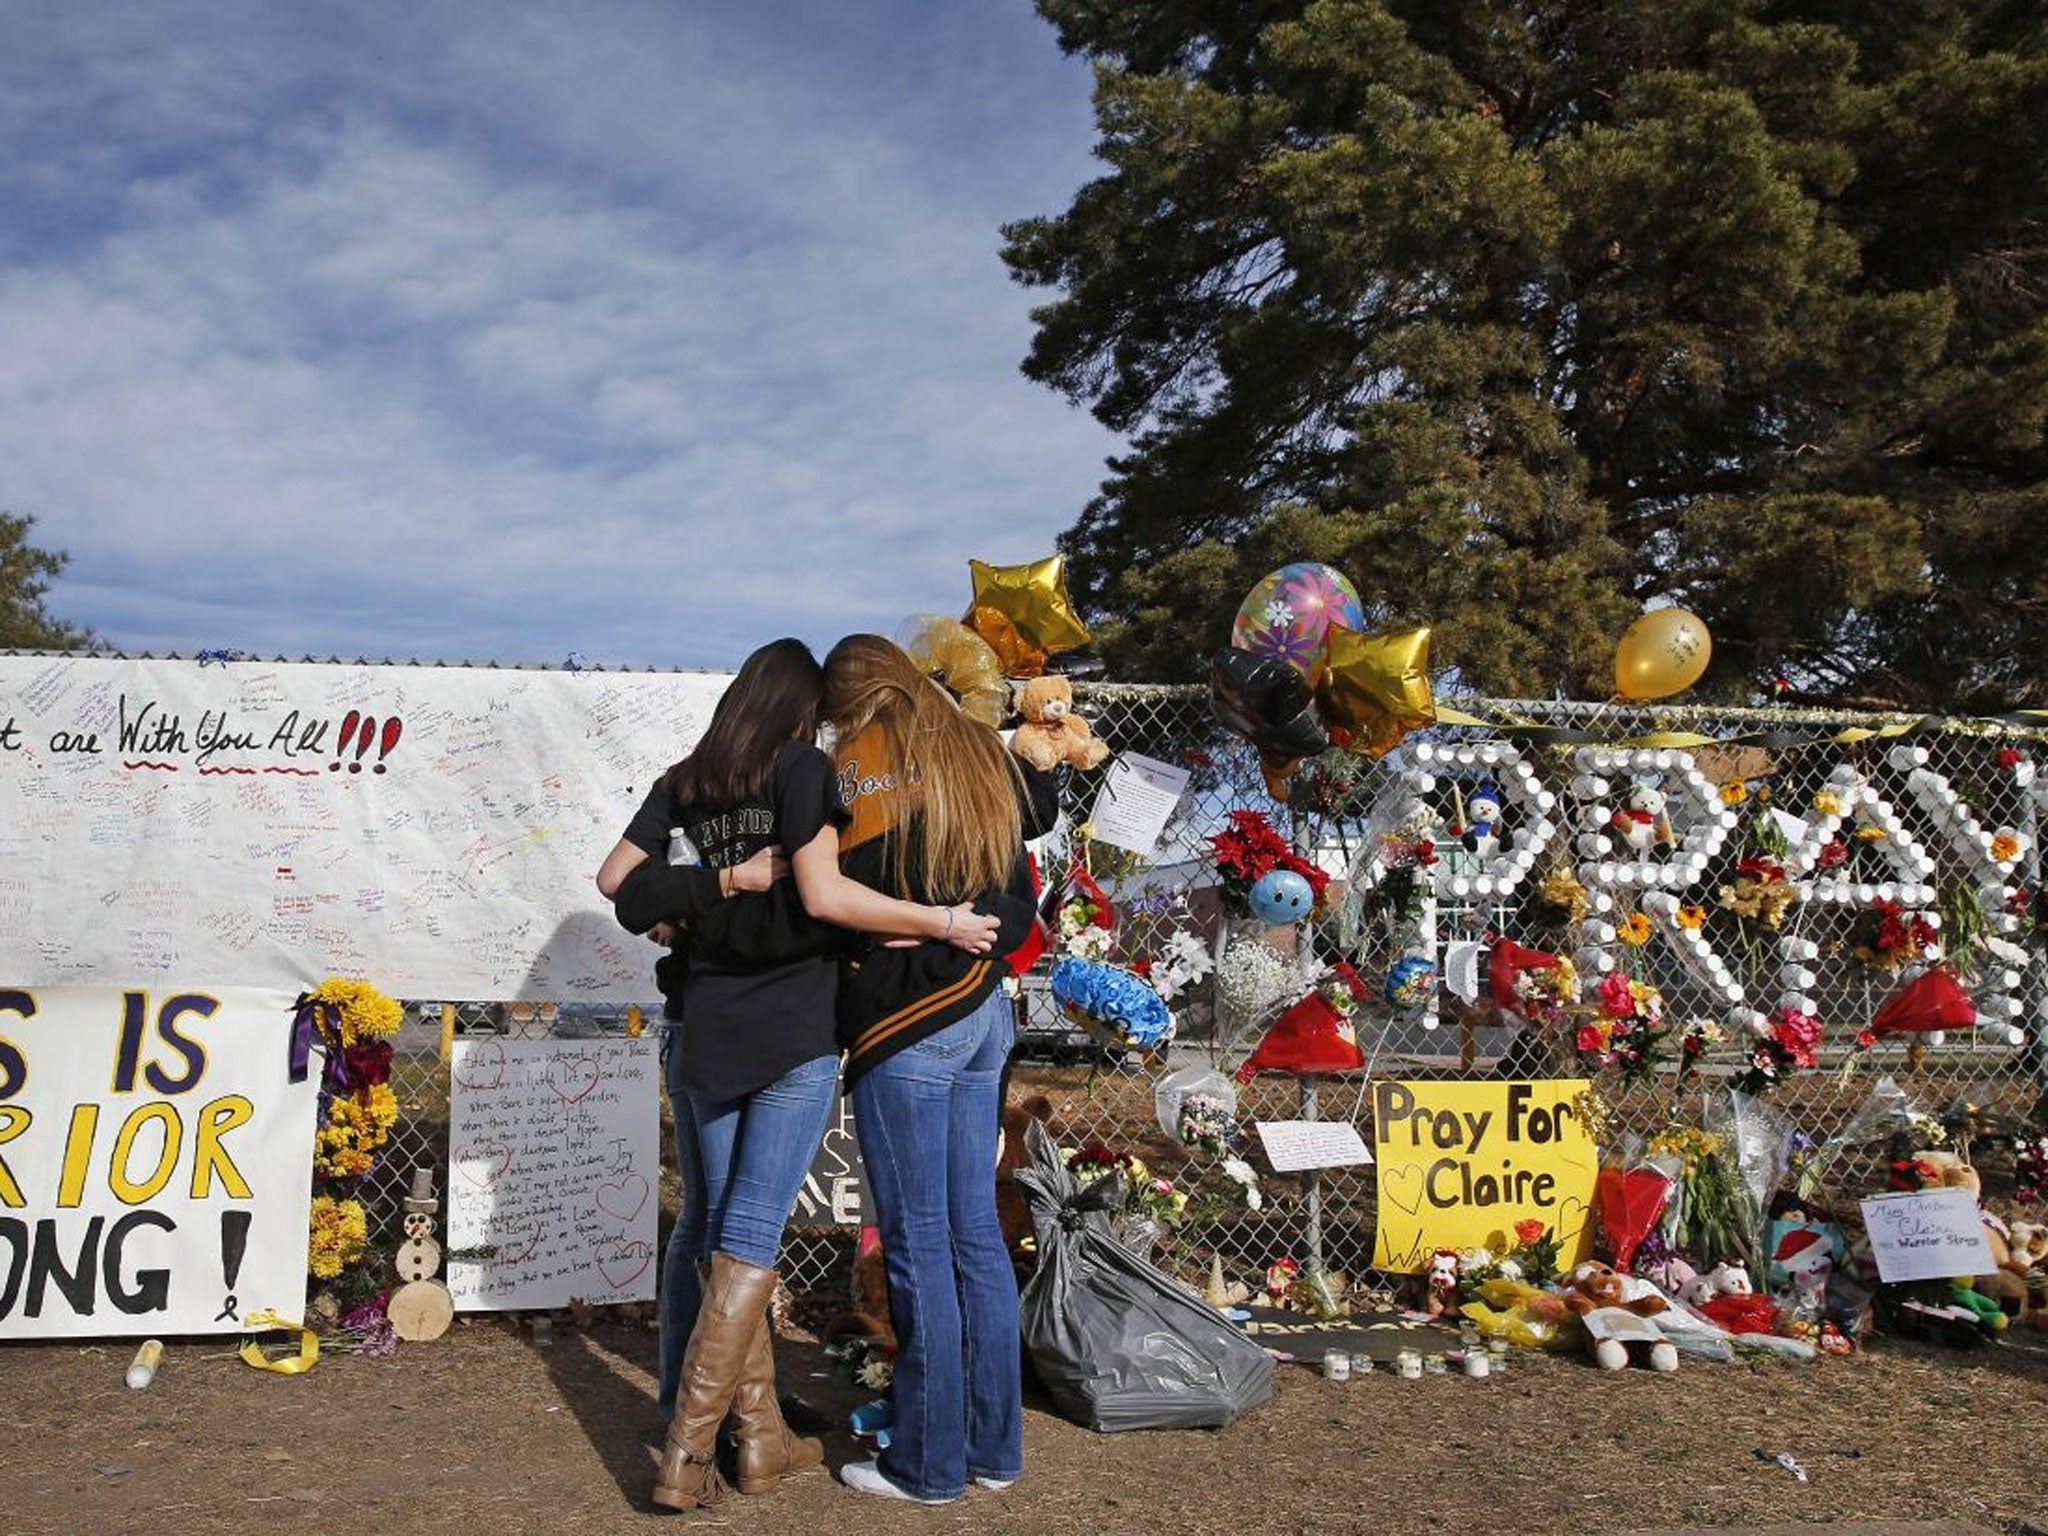 Arapahoe High School students hug at a tribute site for severely wounded student Claire Davis, who was shot by a classmate during a school attack six days earlier at Arapahoe High School, in Centennial, Colo., Thursday 19 December